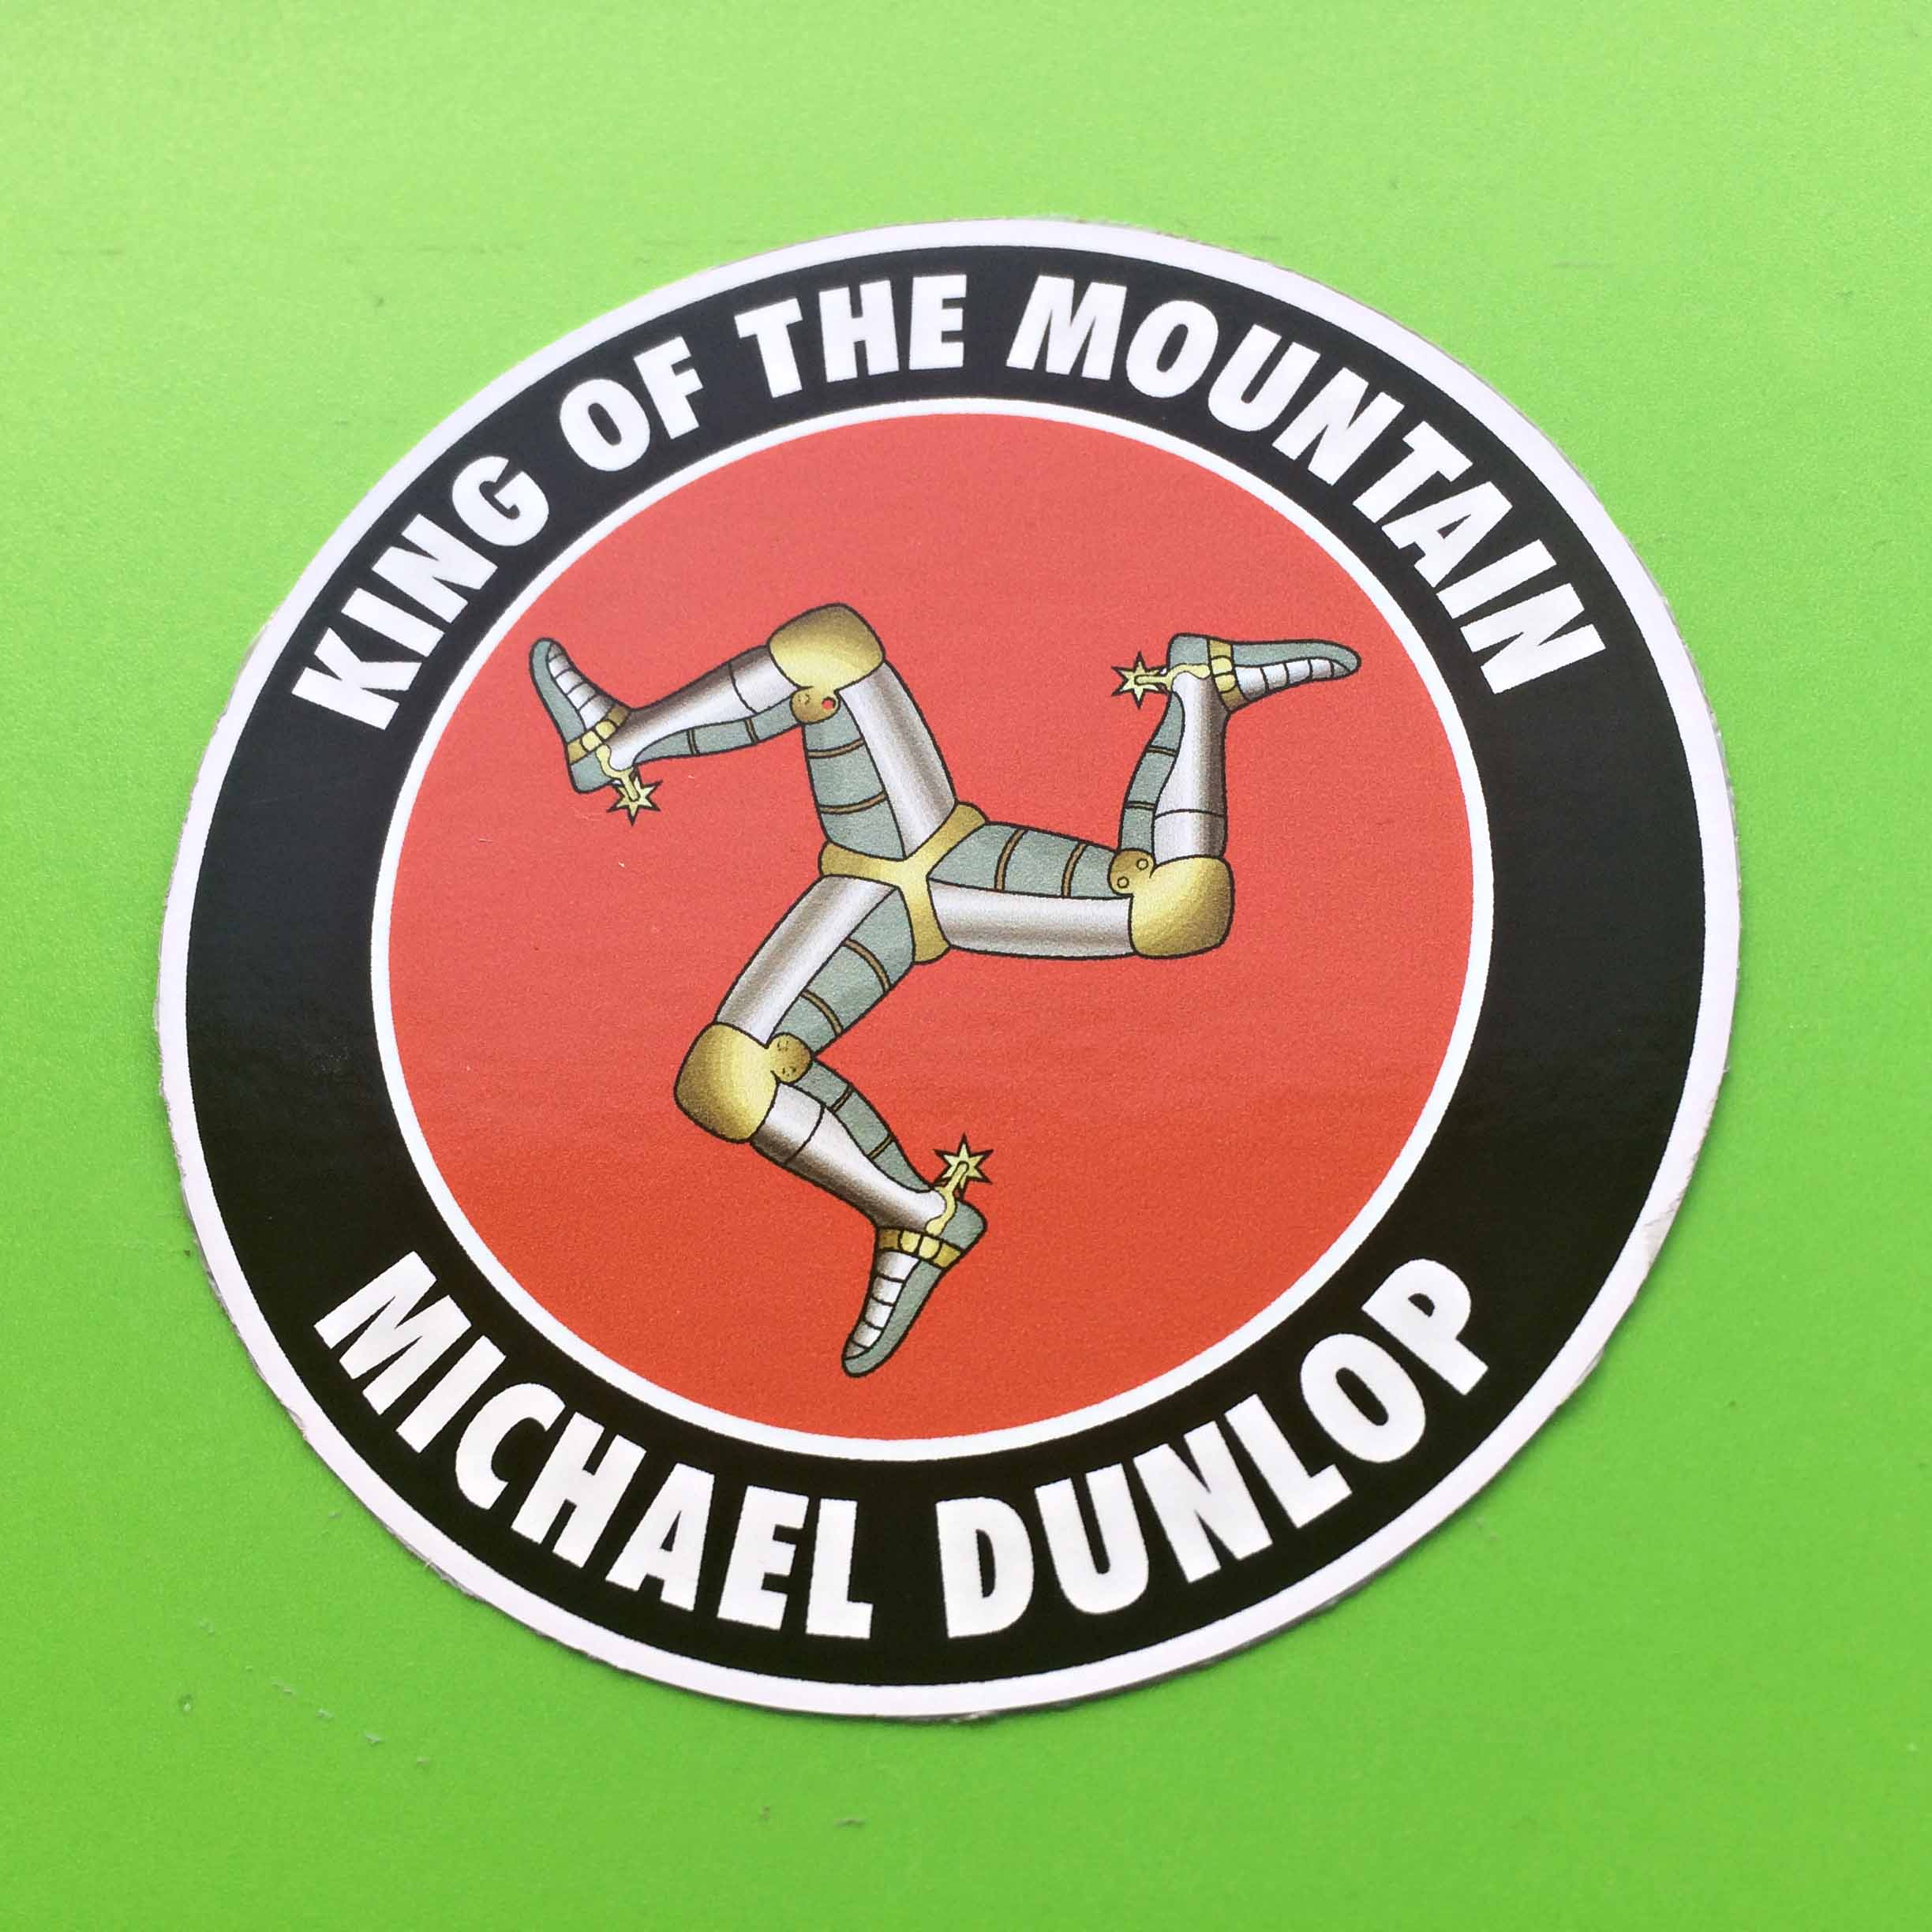 MICHAEL DUNLOP KING OF THE MOUNTAIN STICKER. King Of The Mountain Michael Dunlop in white lettering on a black outer circle. A red inner circle contains the three armoured legs with golden spurs of the Isle of Man.